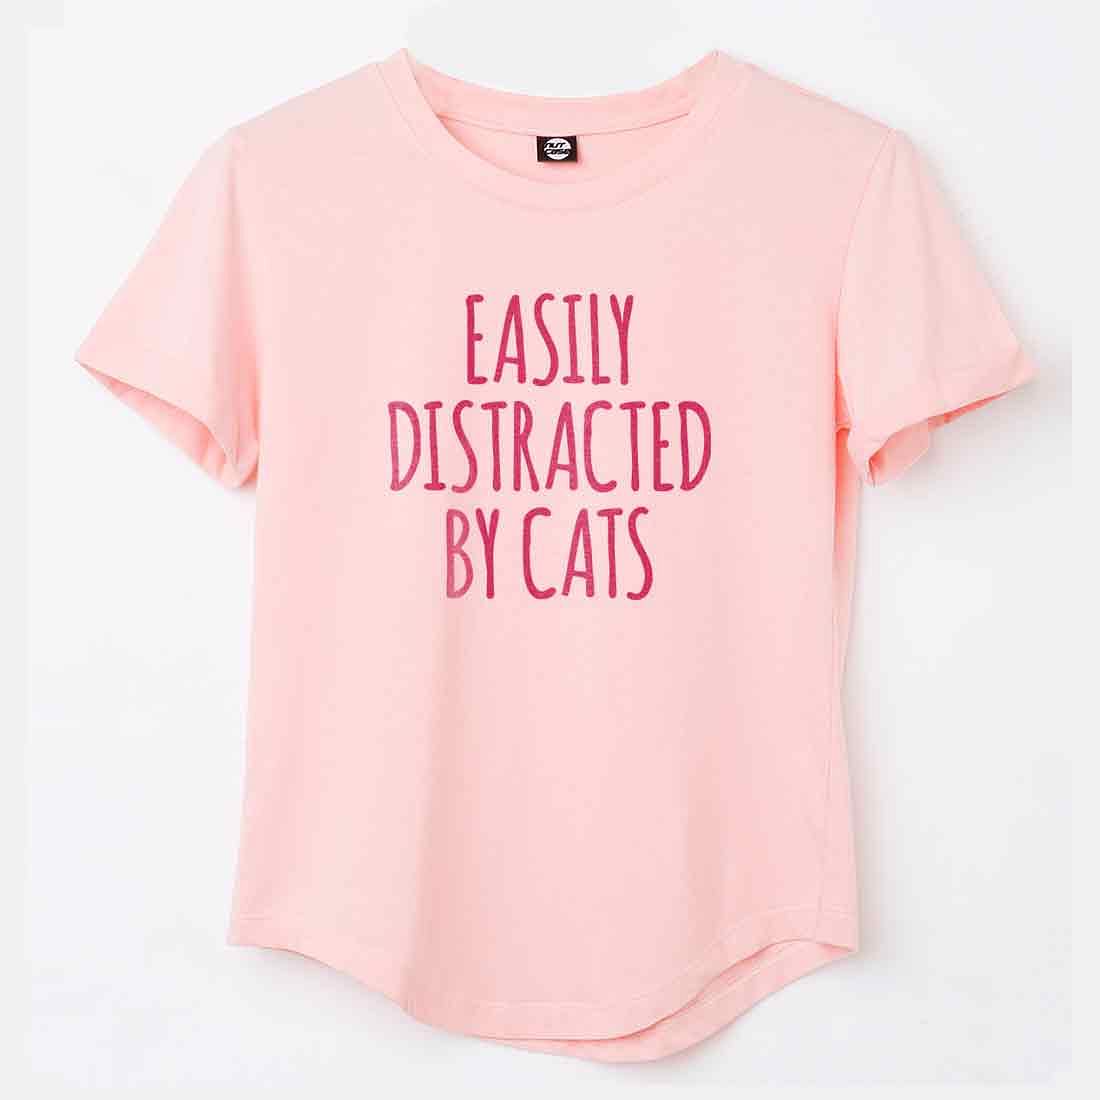 Love Cats T shirt For Girls  - Easily Distracted by Cats Nutcase